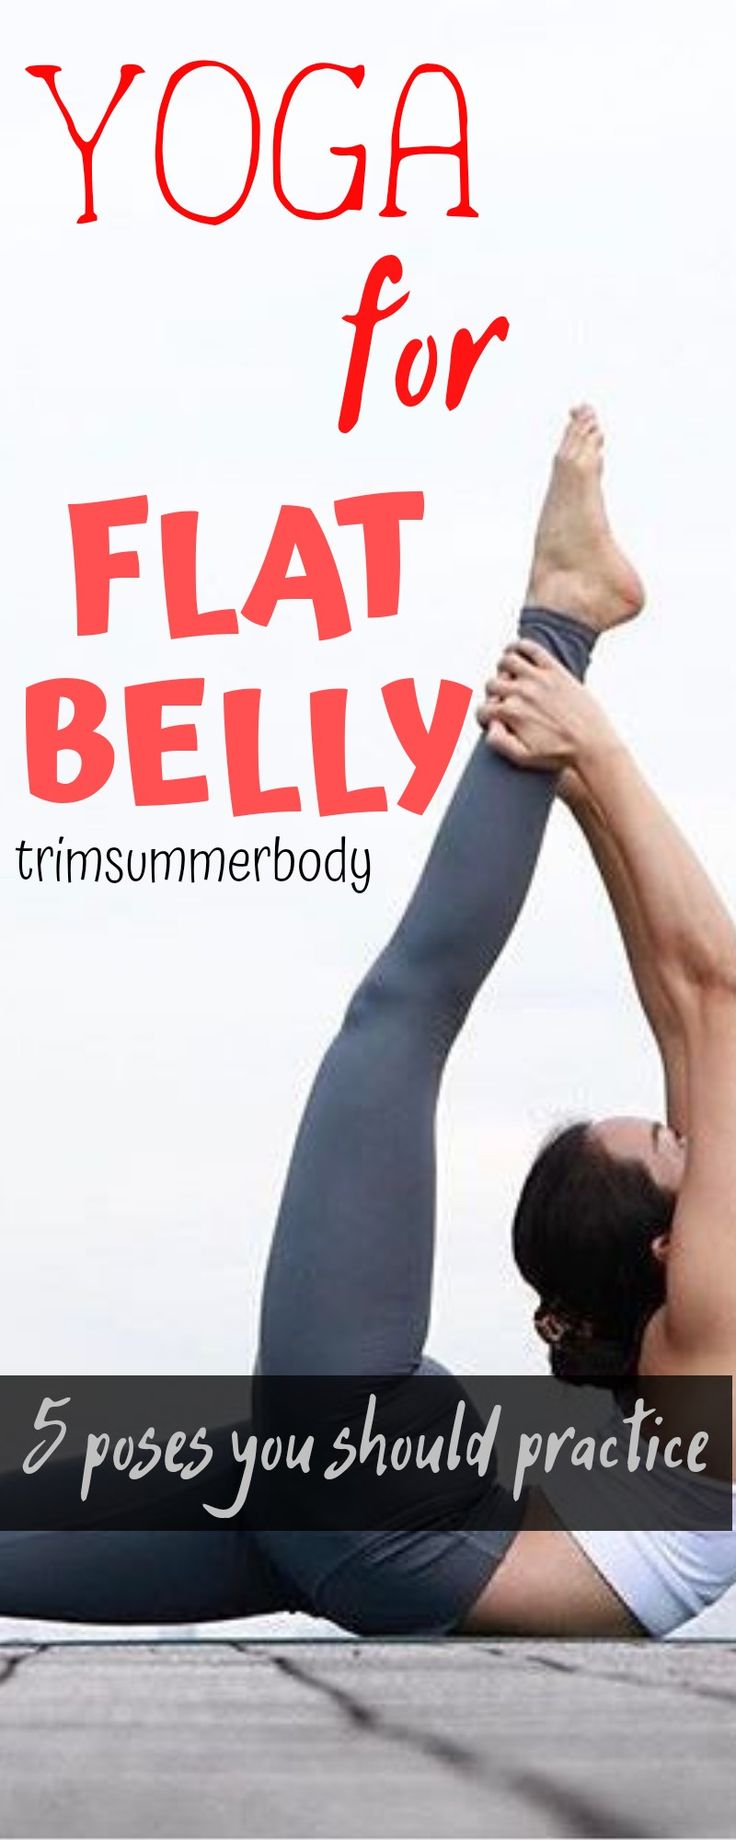 Yoga for flat abs - 5 poses that will make your belly flatter